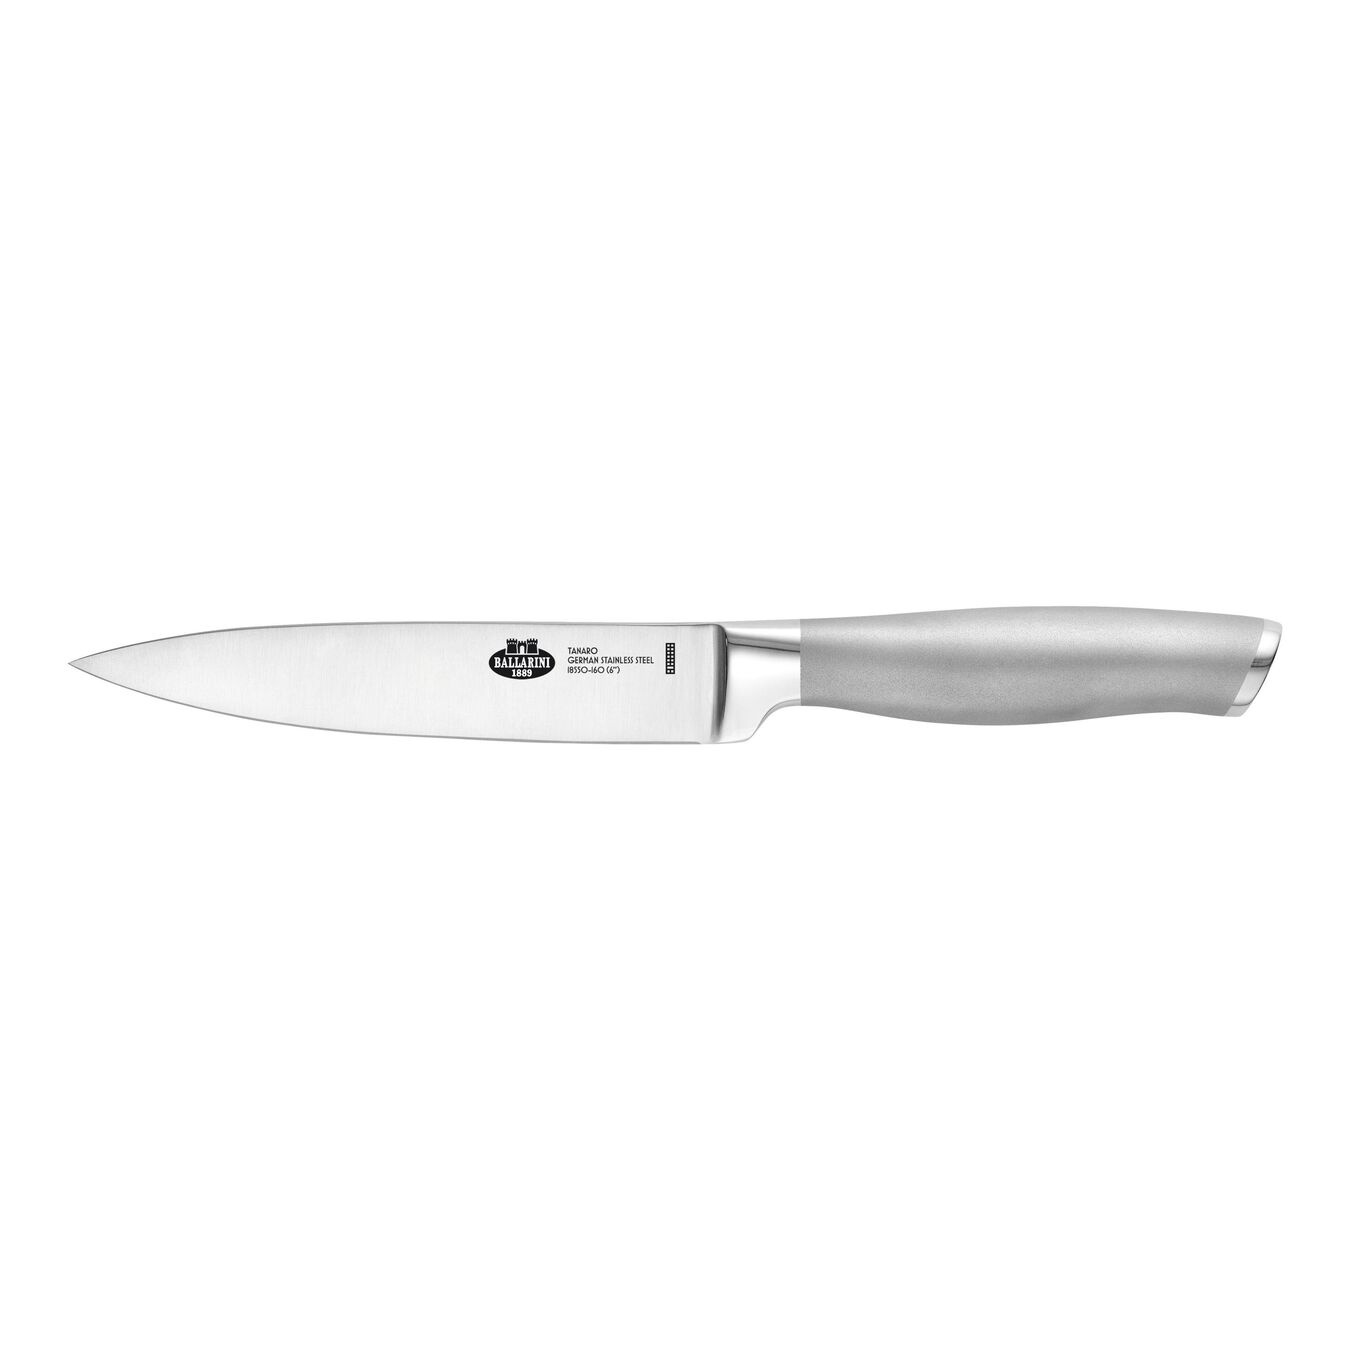 6.5 inch Carving knife,,large 1